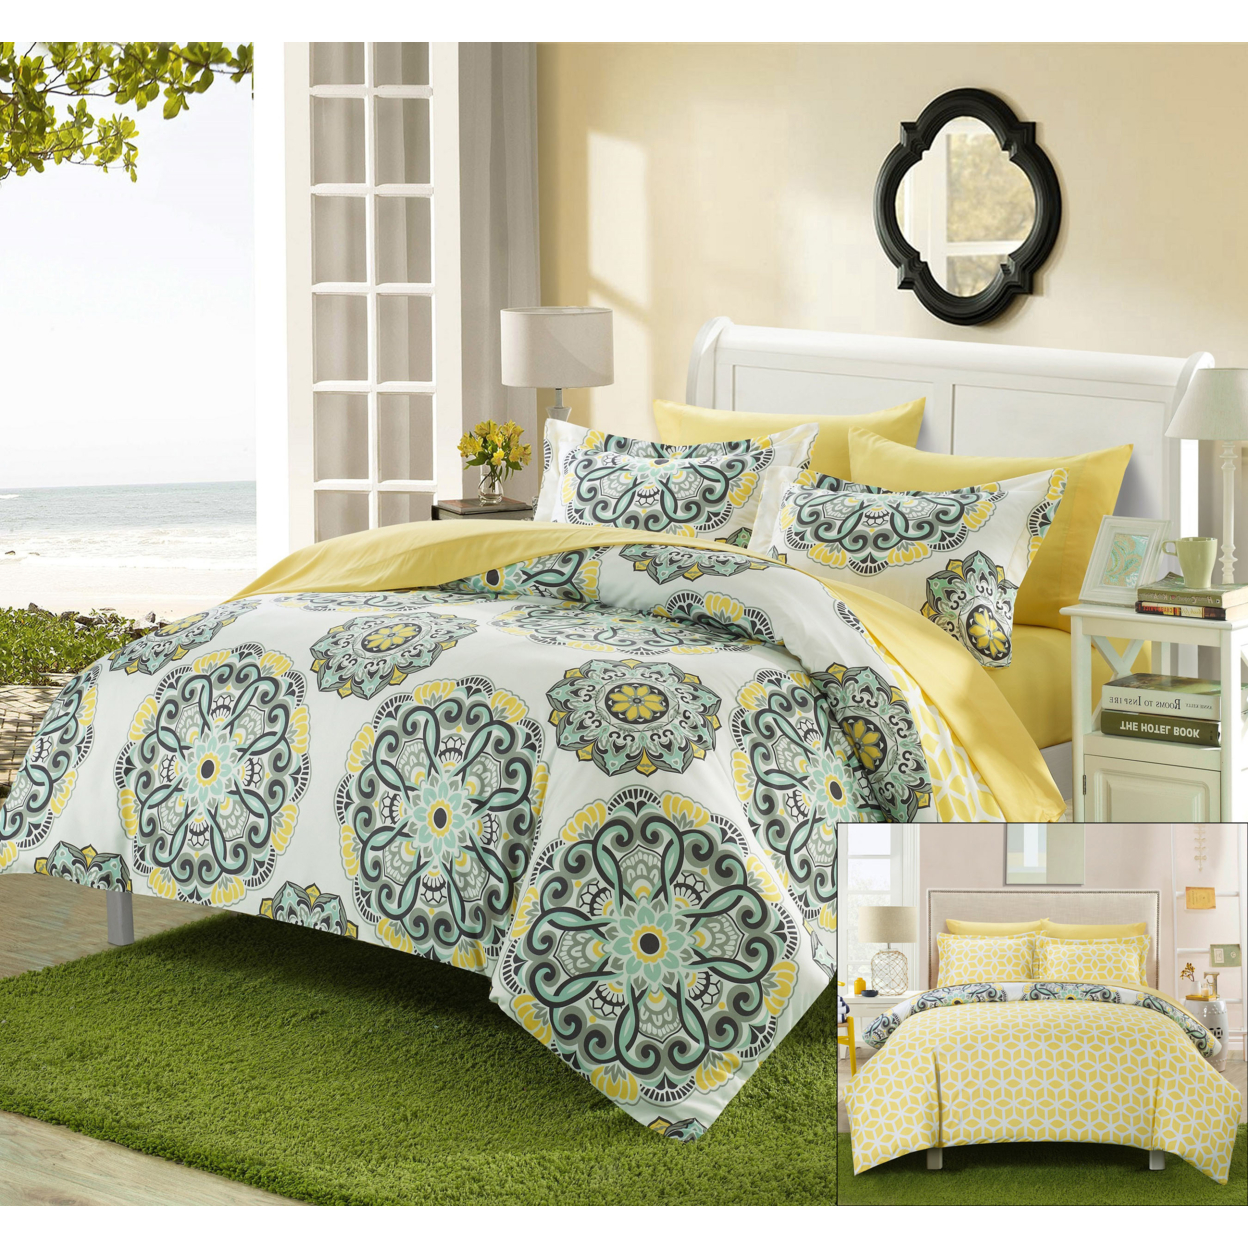 2/3 Piece Majorca Super Soft Microfiber Large Printed Medallion REVERSIBLE With Geometric Printed Backing Duvet Set - Yellow, Full/Queen